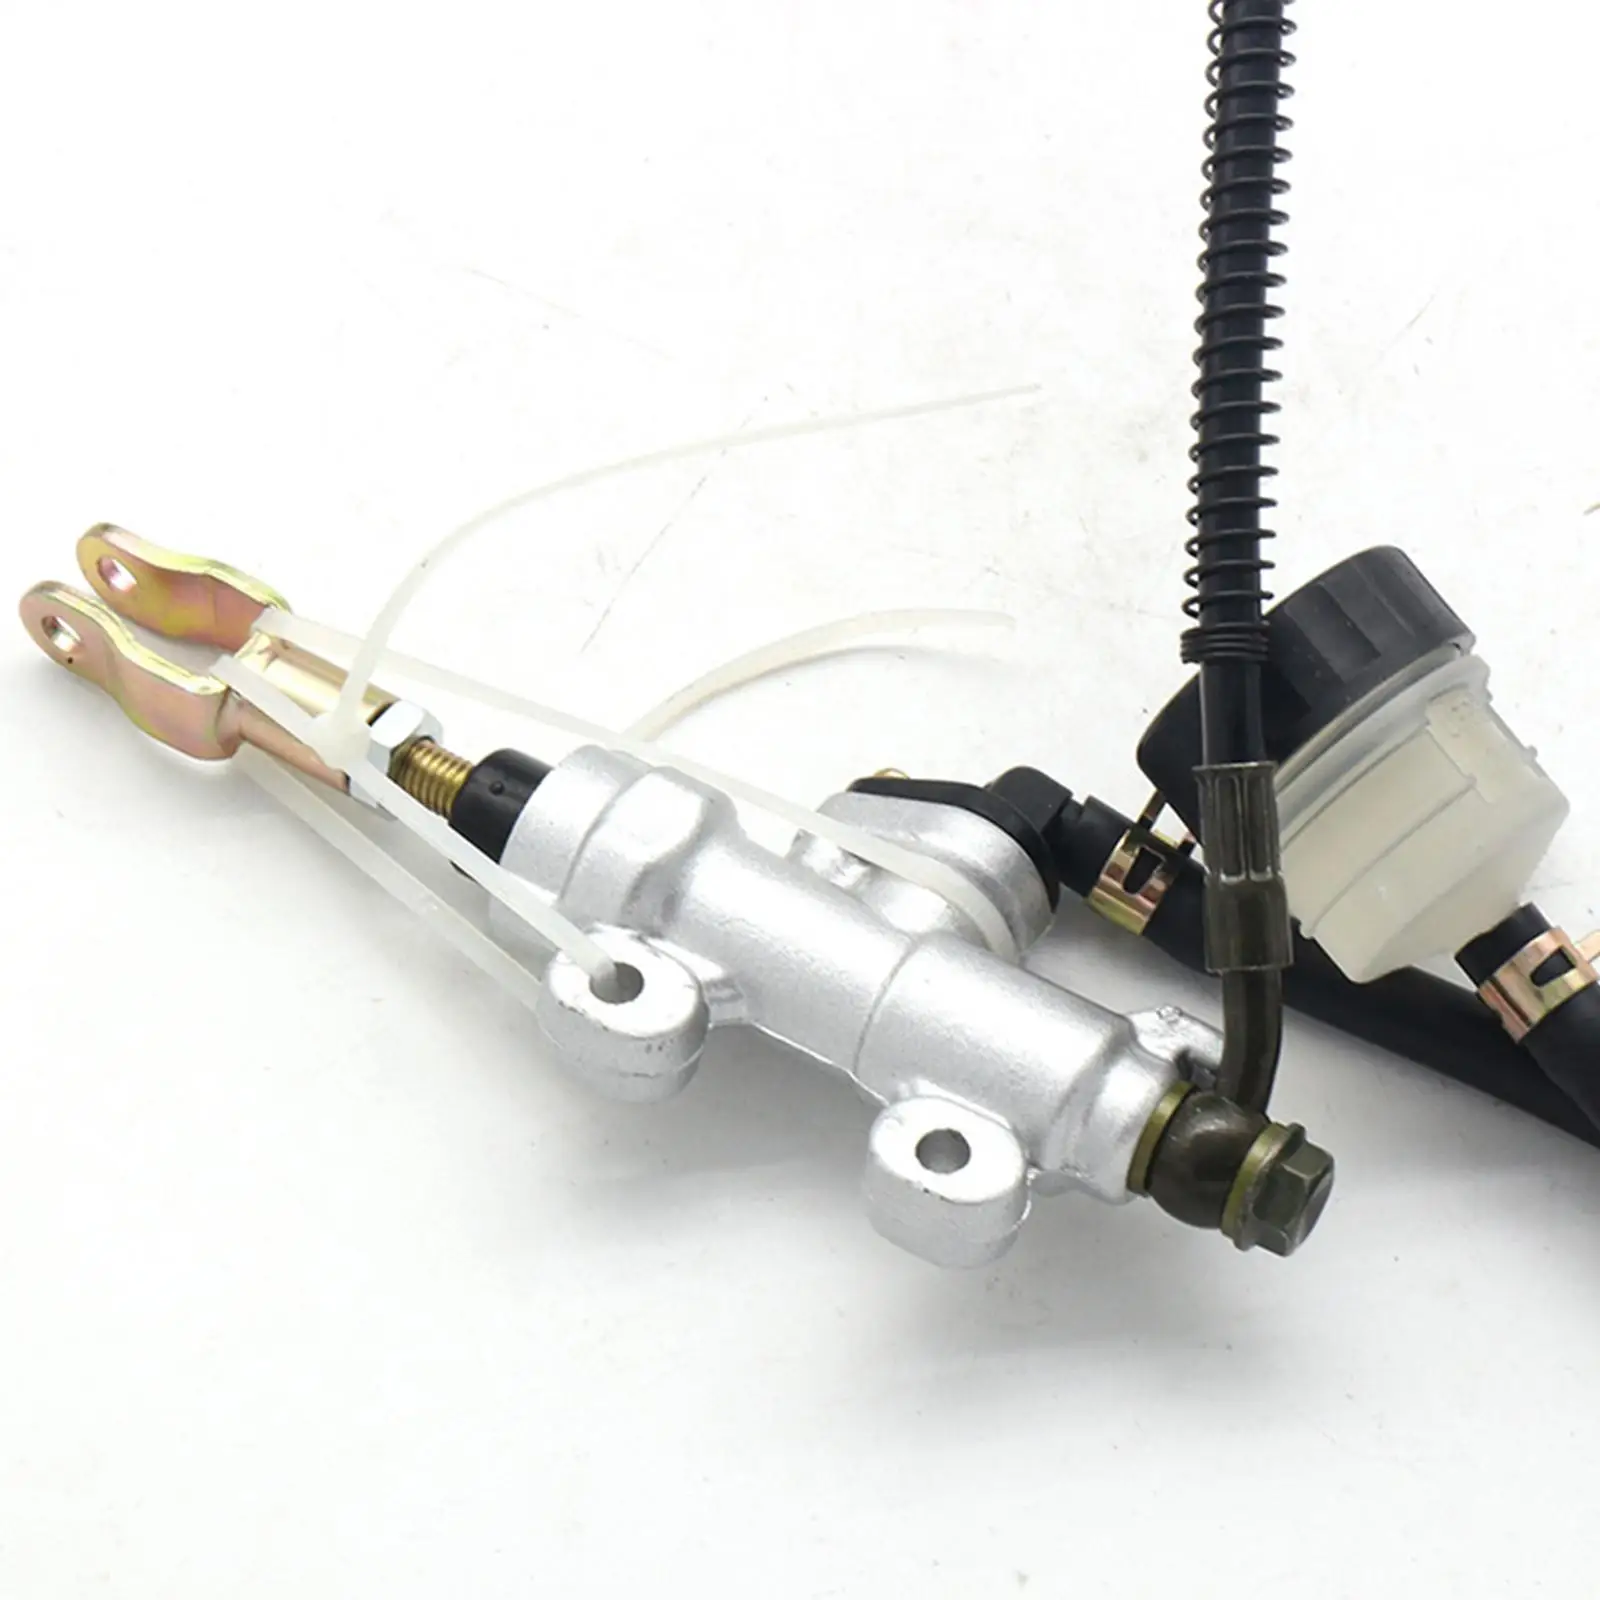 Rear Brake Master Cylinder Caliper Spare Parts Durable Aluminum Rear Disc Brake Master Cylinder Assembly for 110cc 125cc